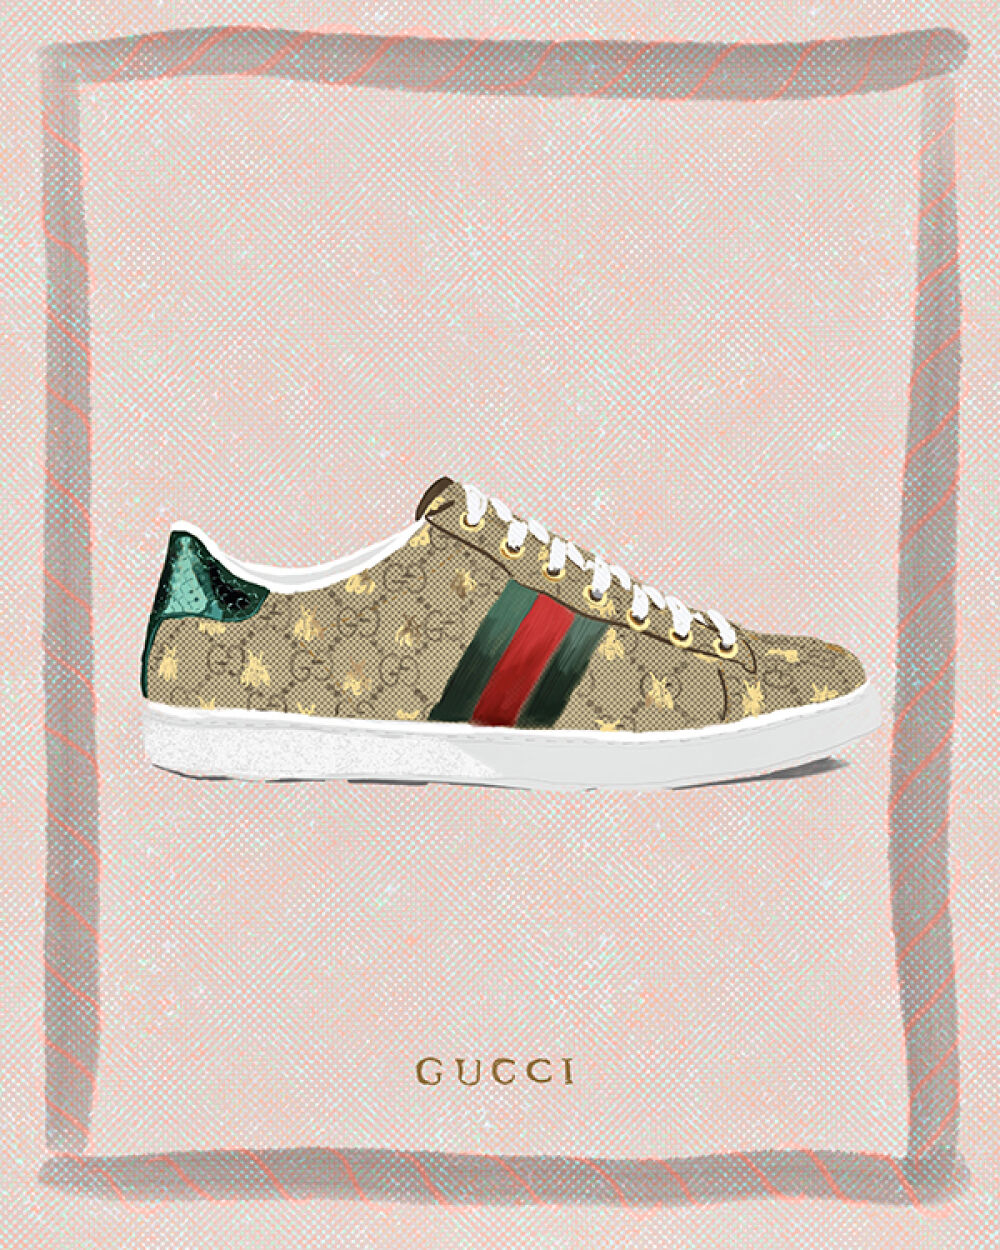 Gucci Sneaker illustration for advertising campaign by Christina Gliha